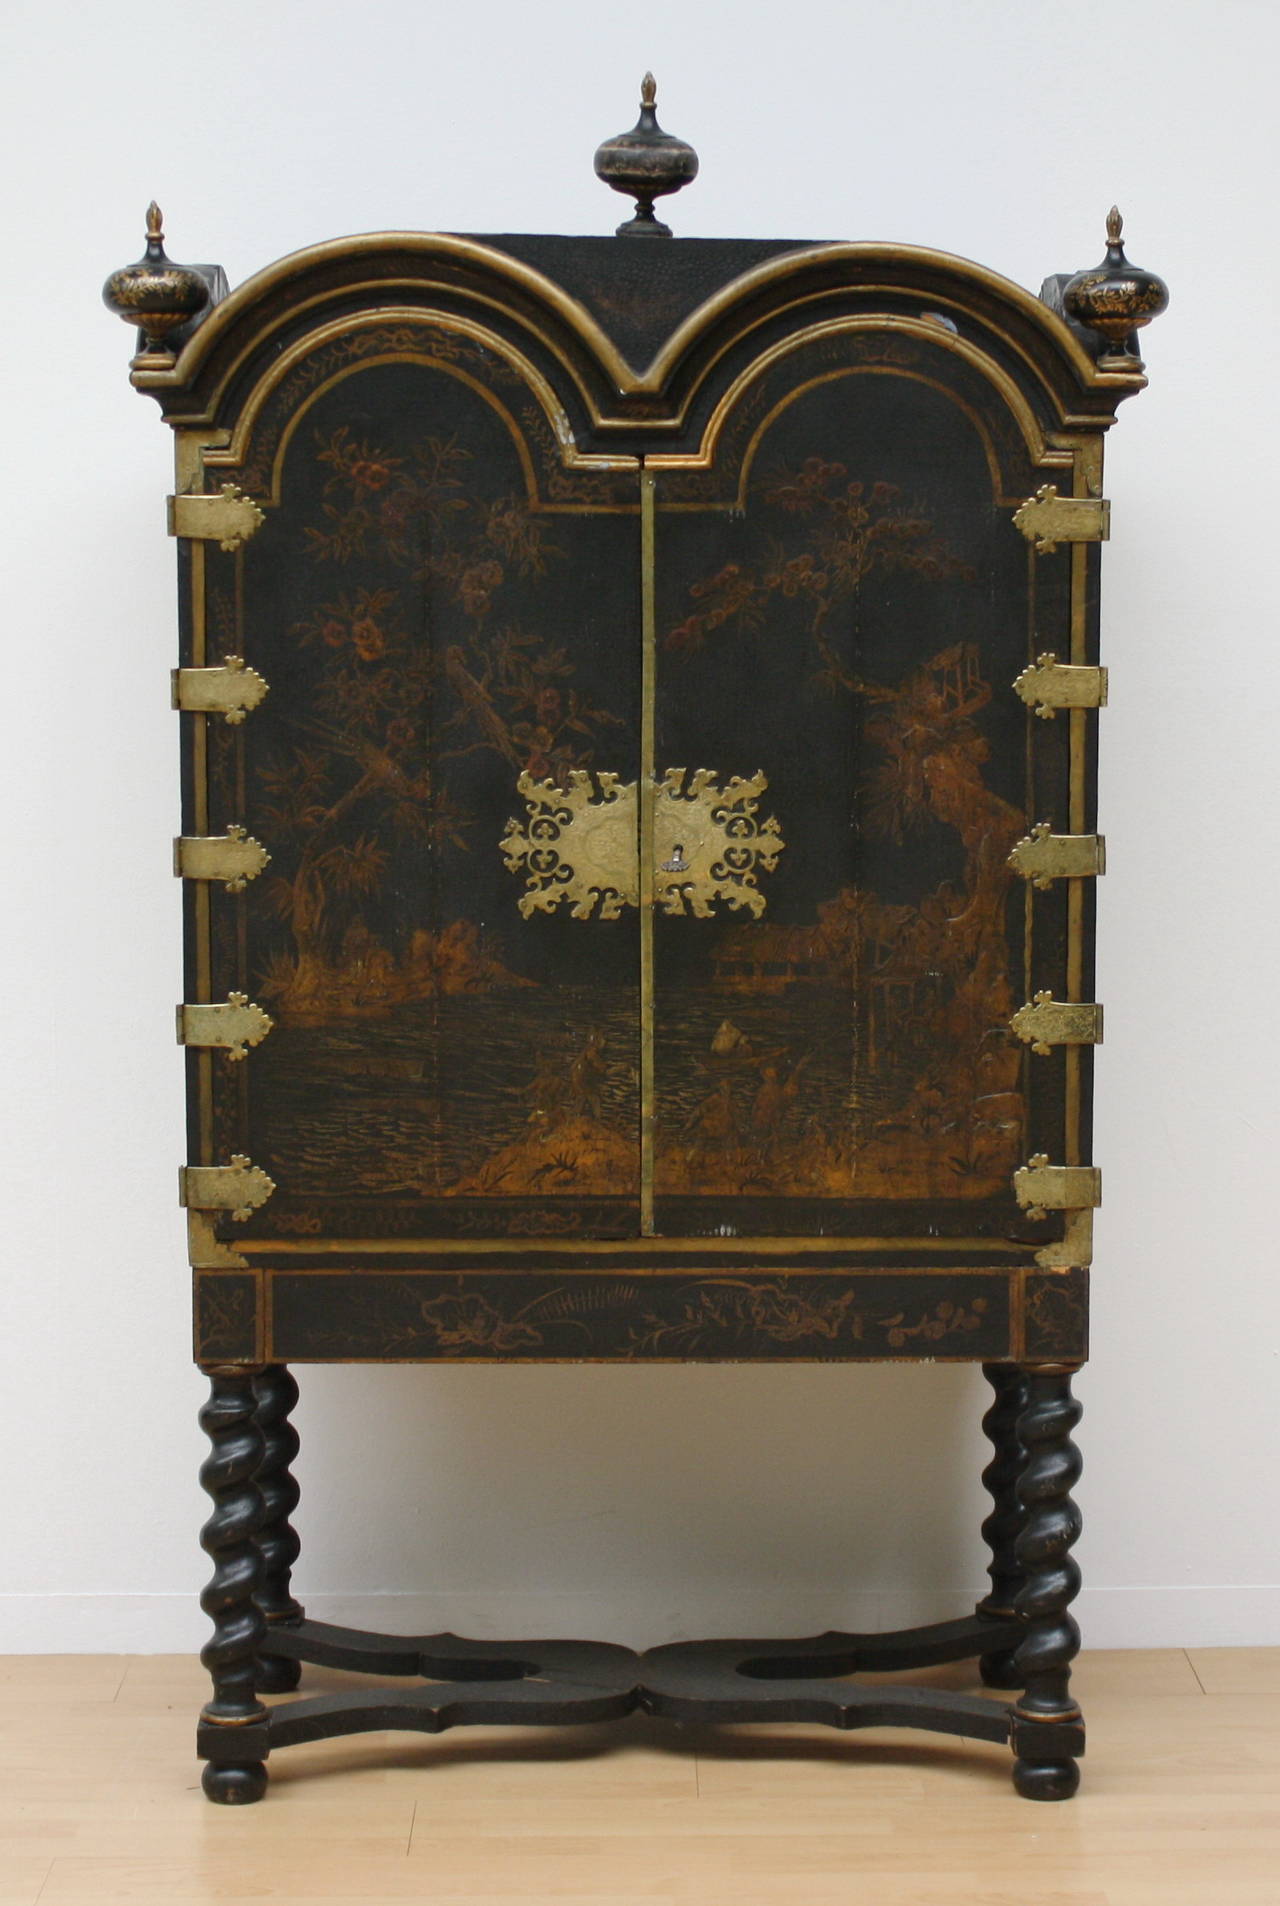 An Baroque chinoiserie cabinet with brazen fittings, England.
Black and gold painted with chinoise motive. Inside ten drawers.